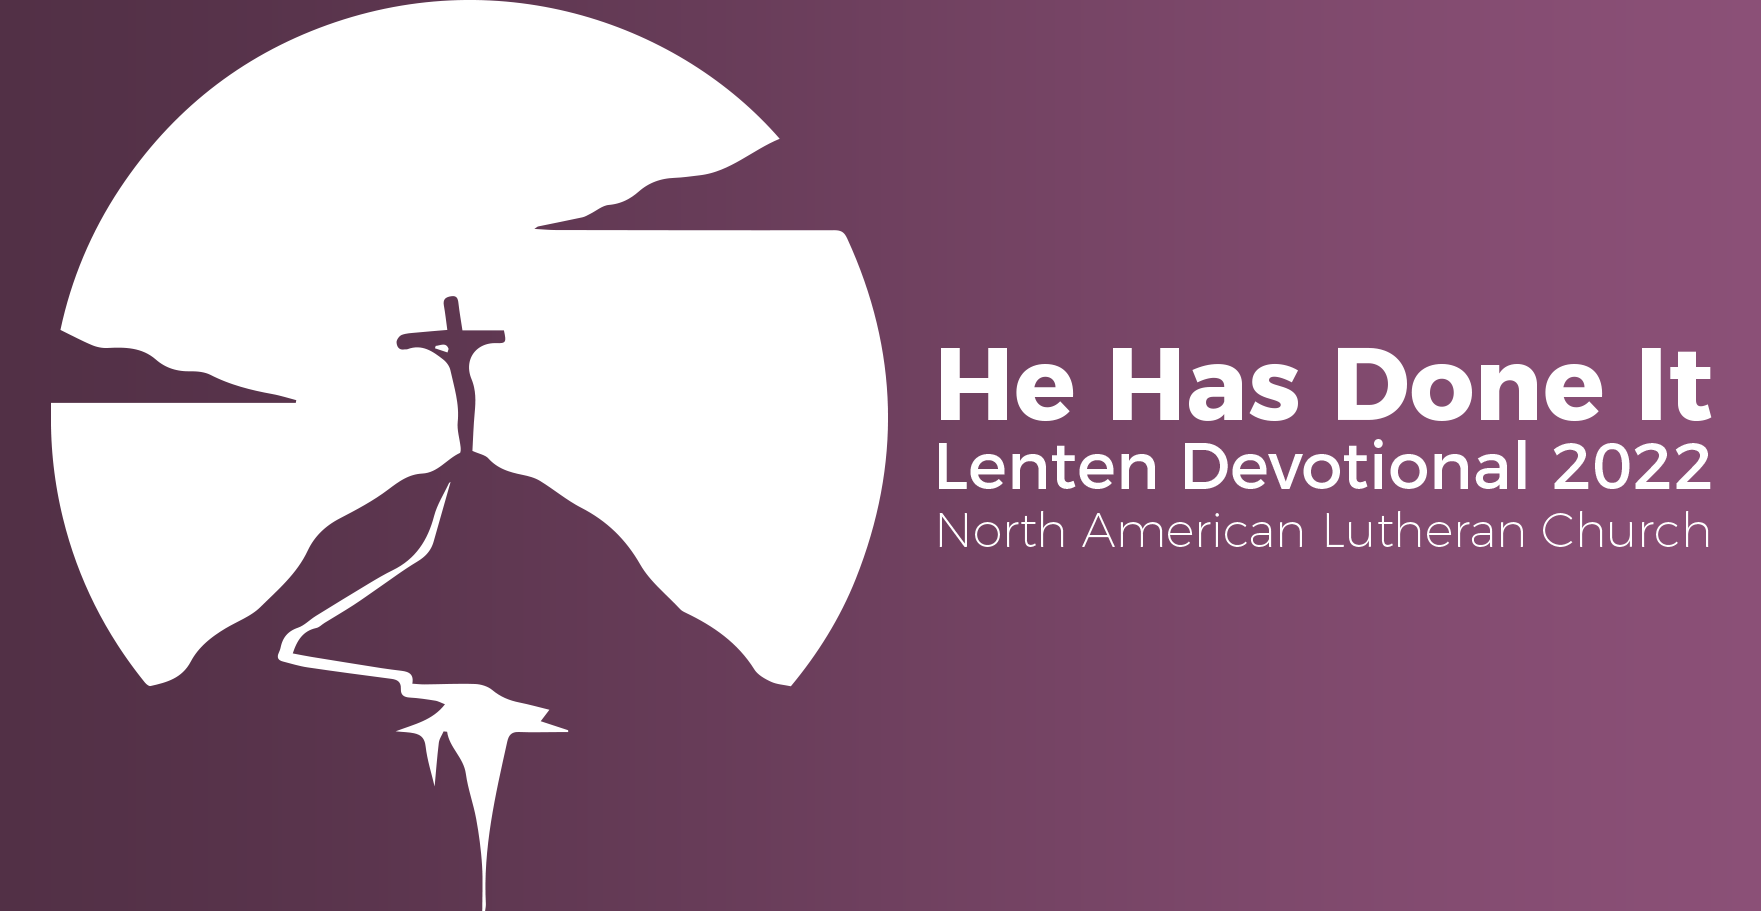 March 14, 2022 | Monday of the Week of Lent II